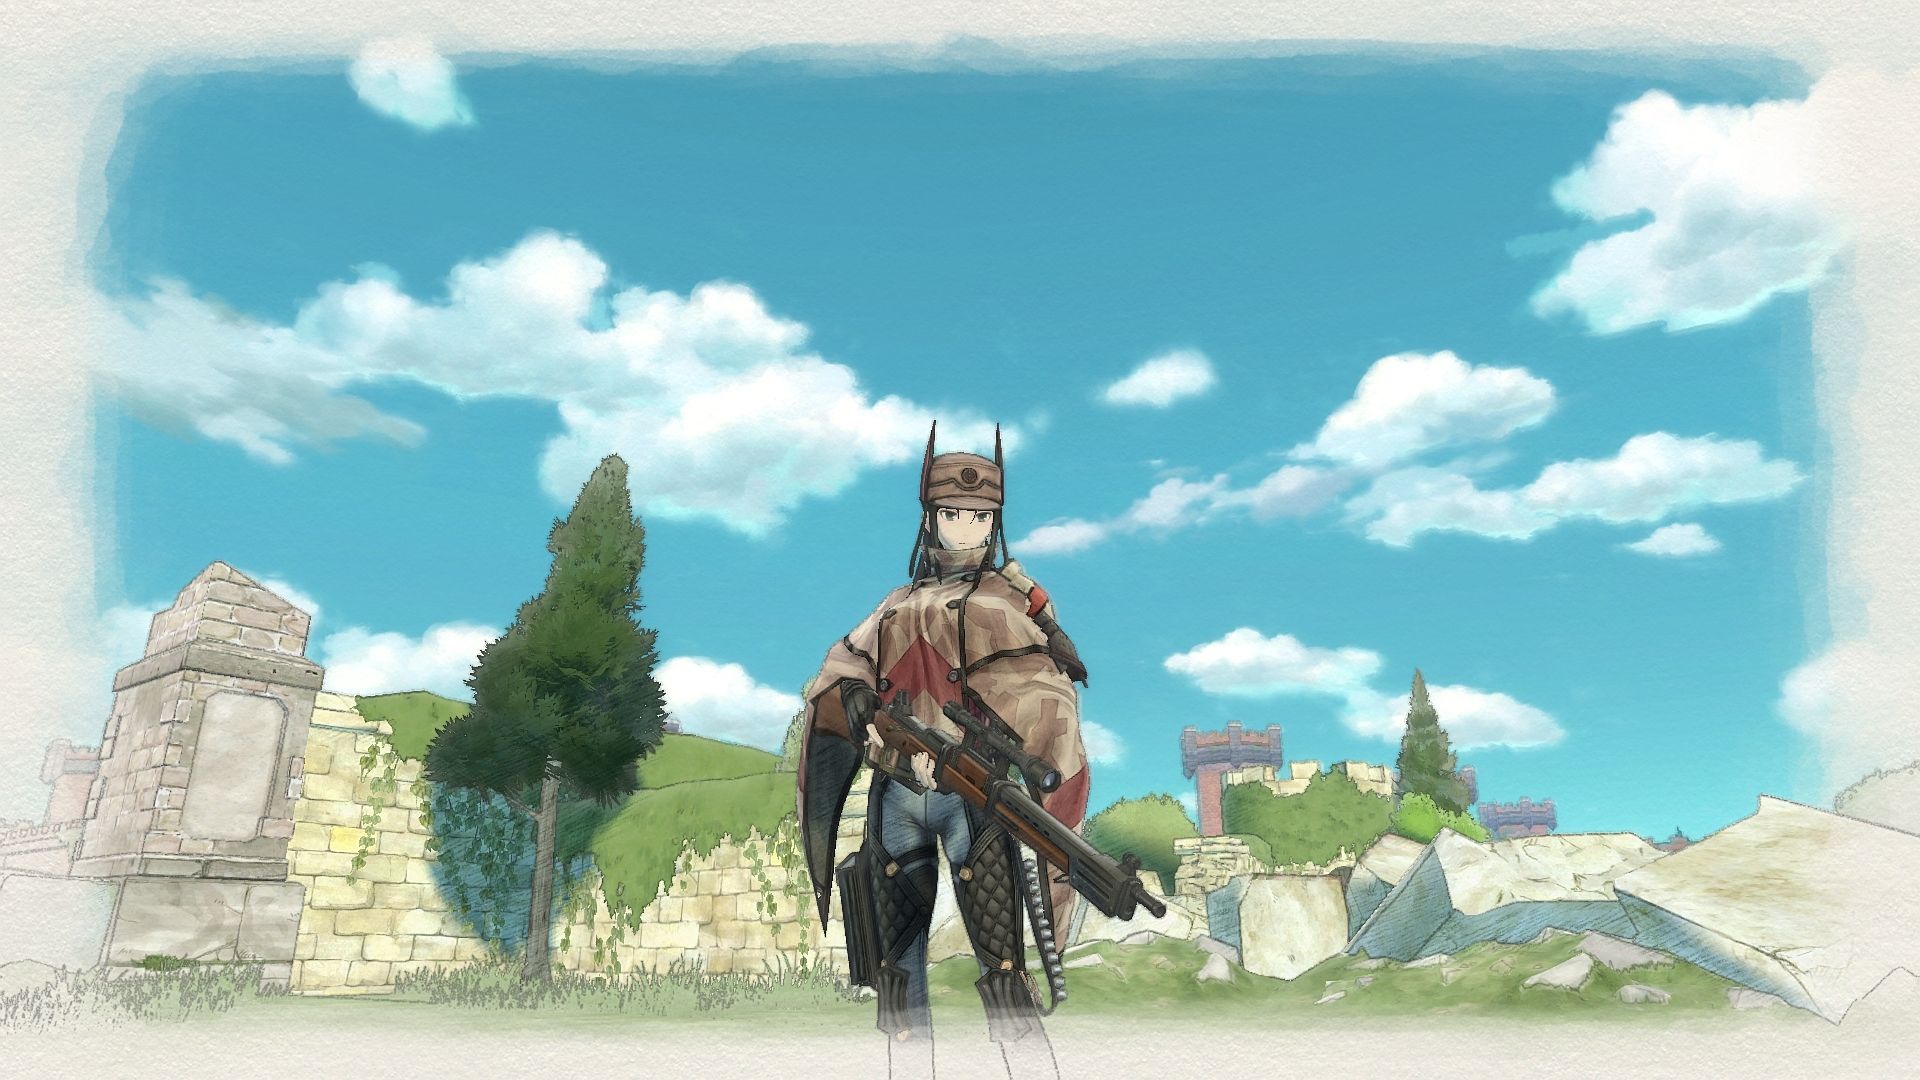 http://www.perfectly-nintendo.com/wp-content/gallery/valkyria-chronicles-4-27-12-2017/40.jpg